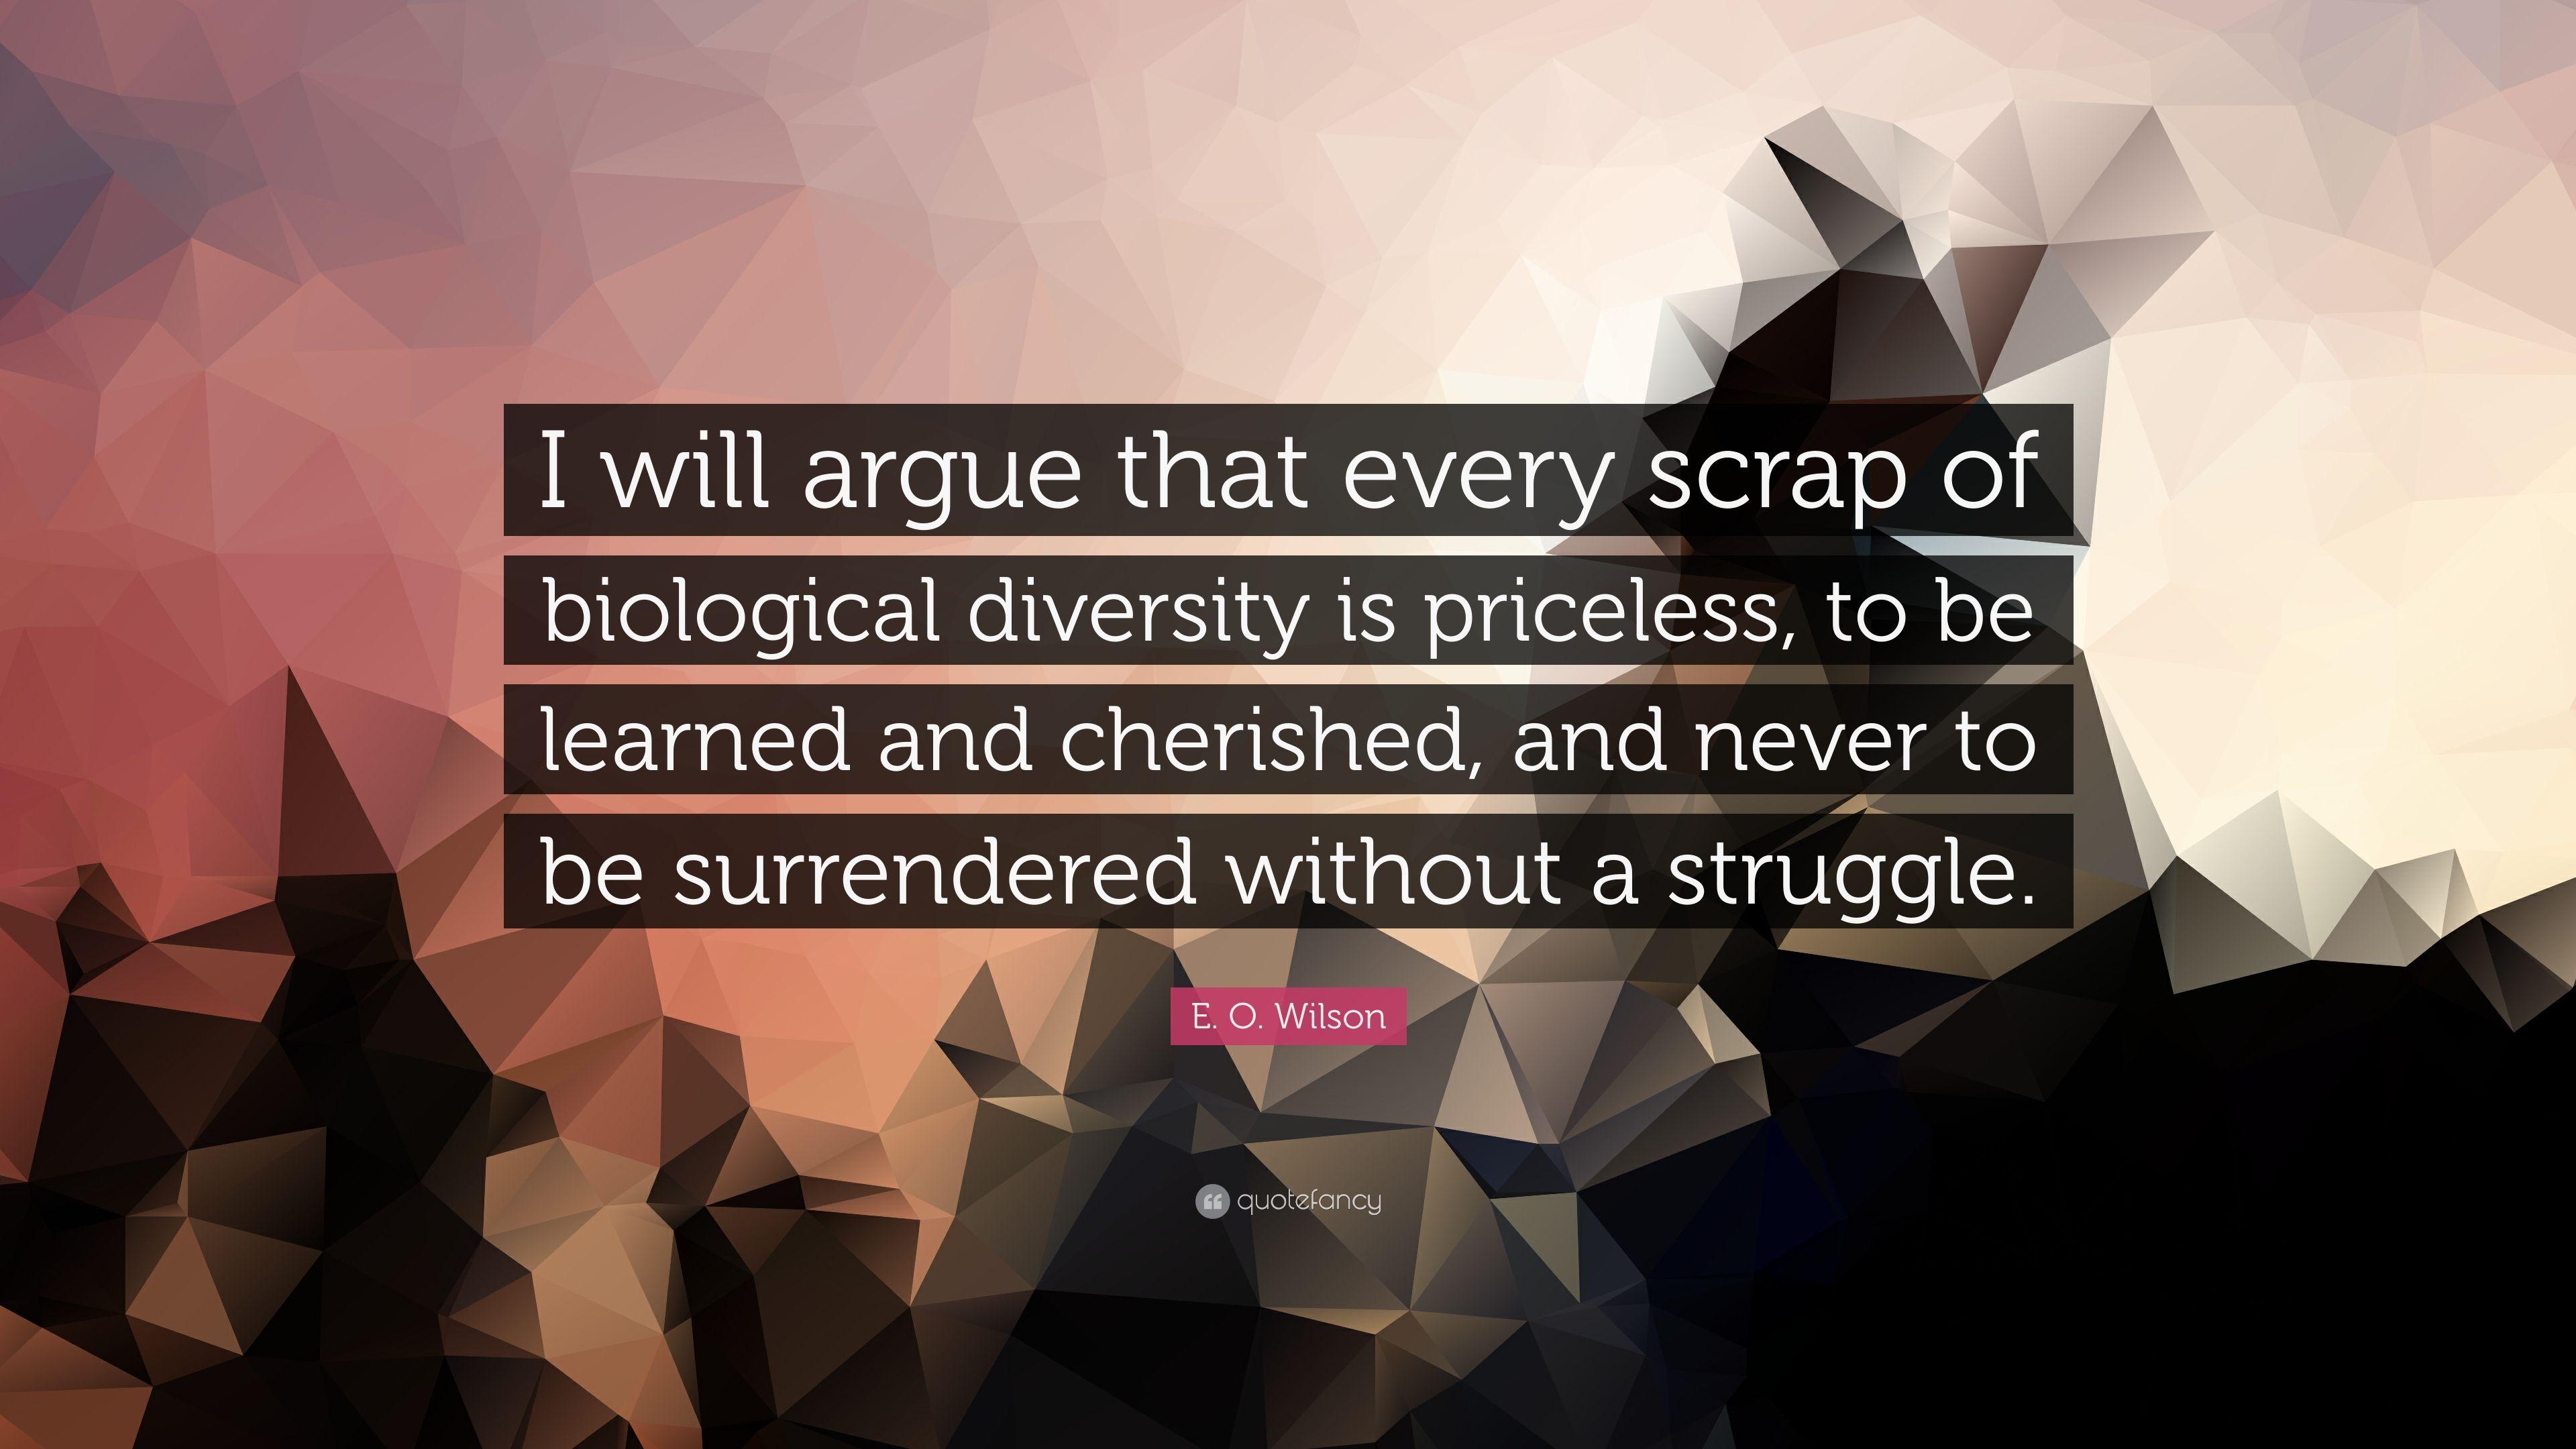 E. O. Wilson Quote: “I will argue that every scrap of biological